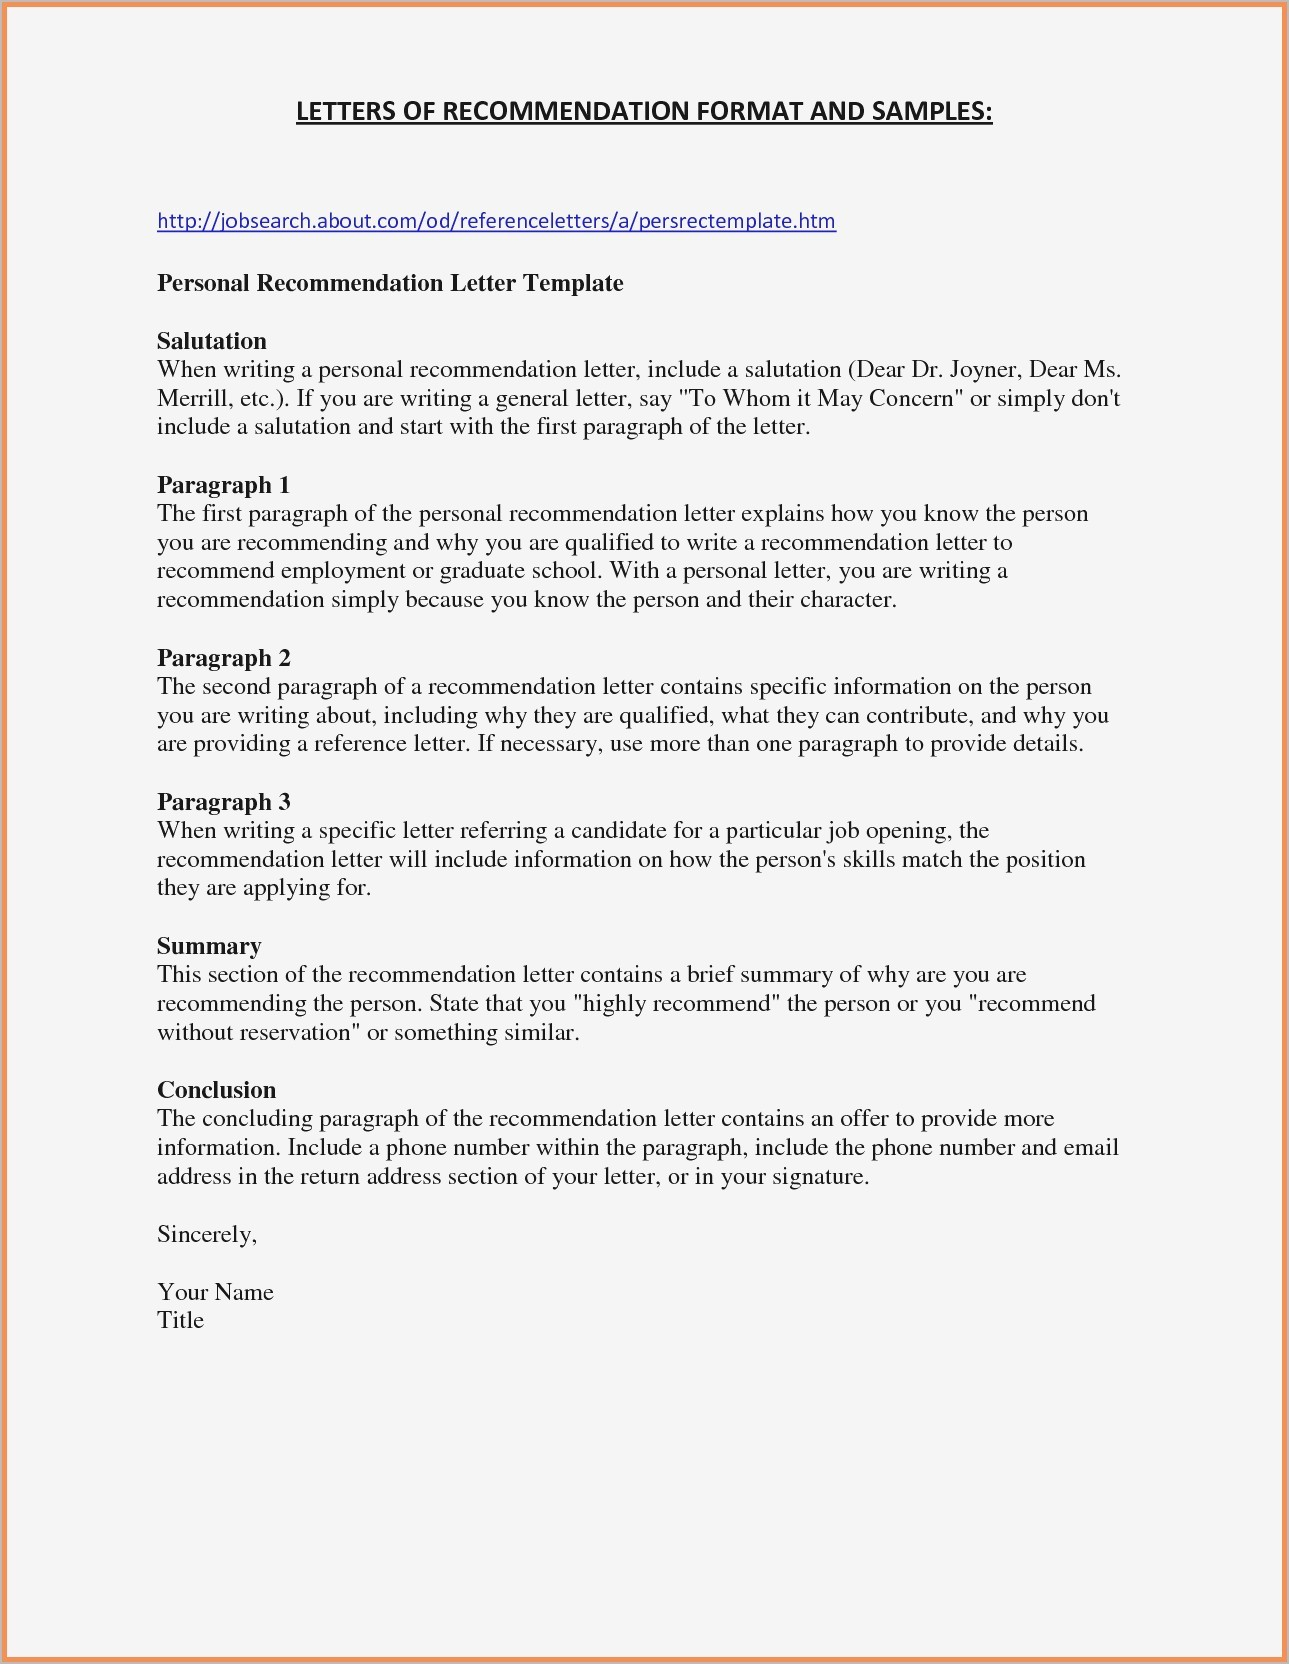 Letter Of Recommendation for A Friend Template - Letters Re Mendation for A Job Refrence Writing A Letter Re